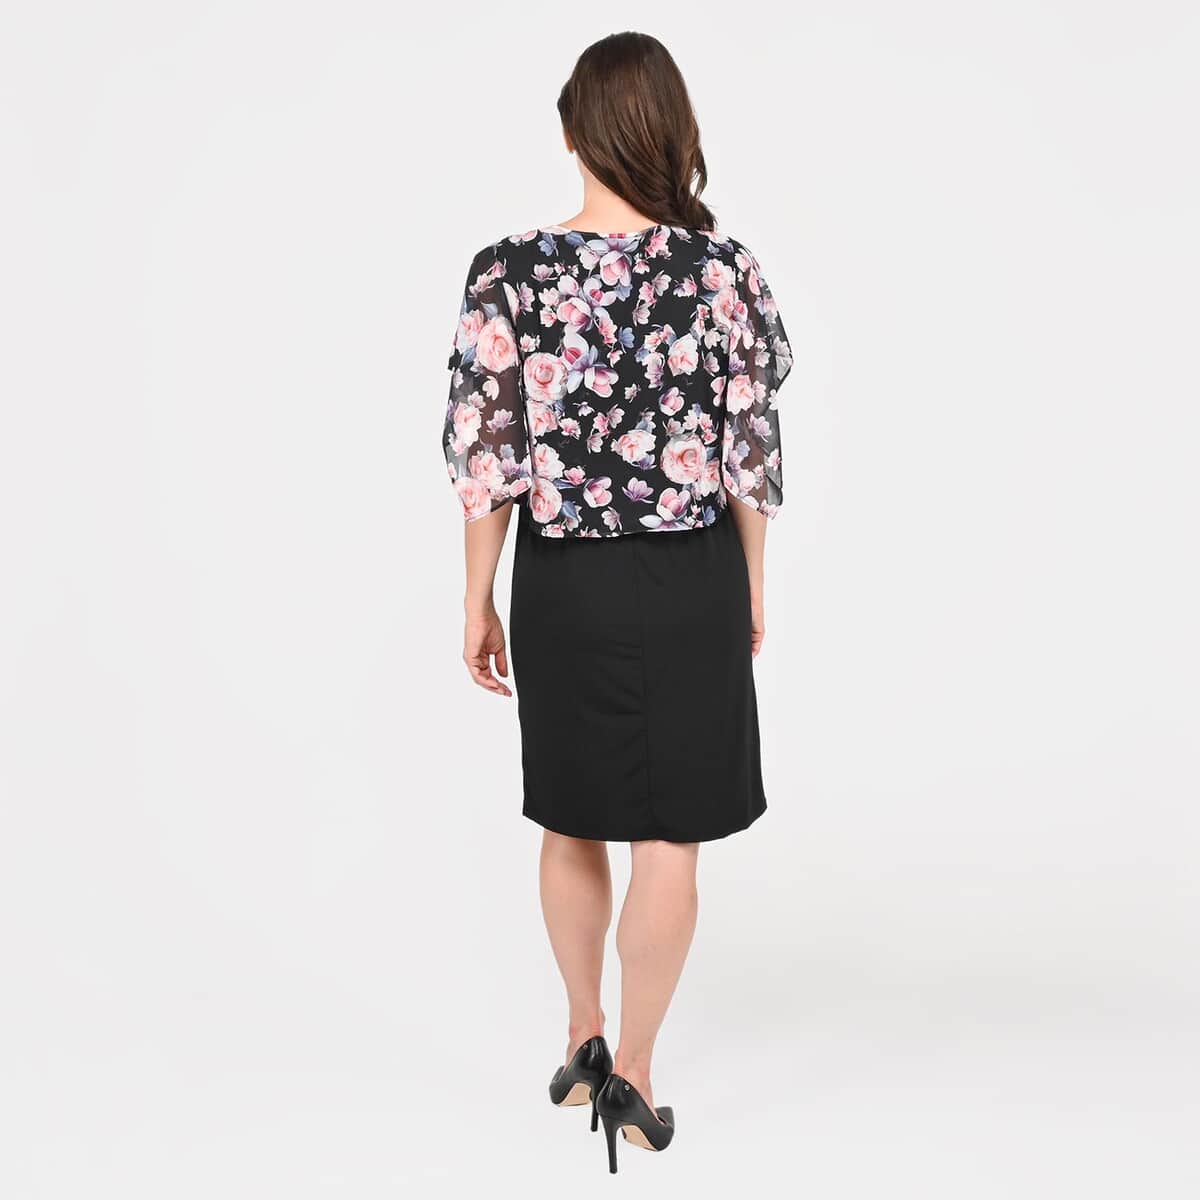 Tamsy Black Floral Dress with Overlay - L image number 1